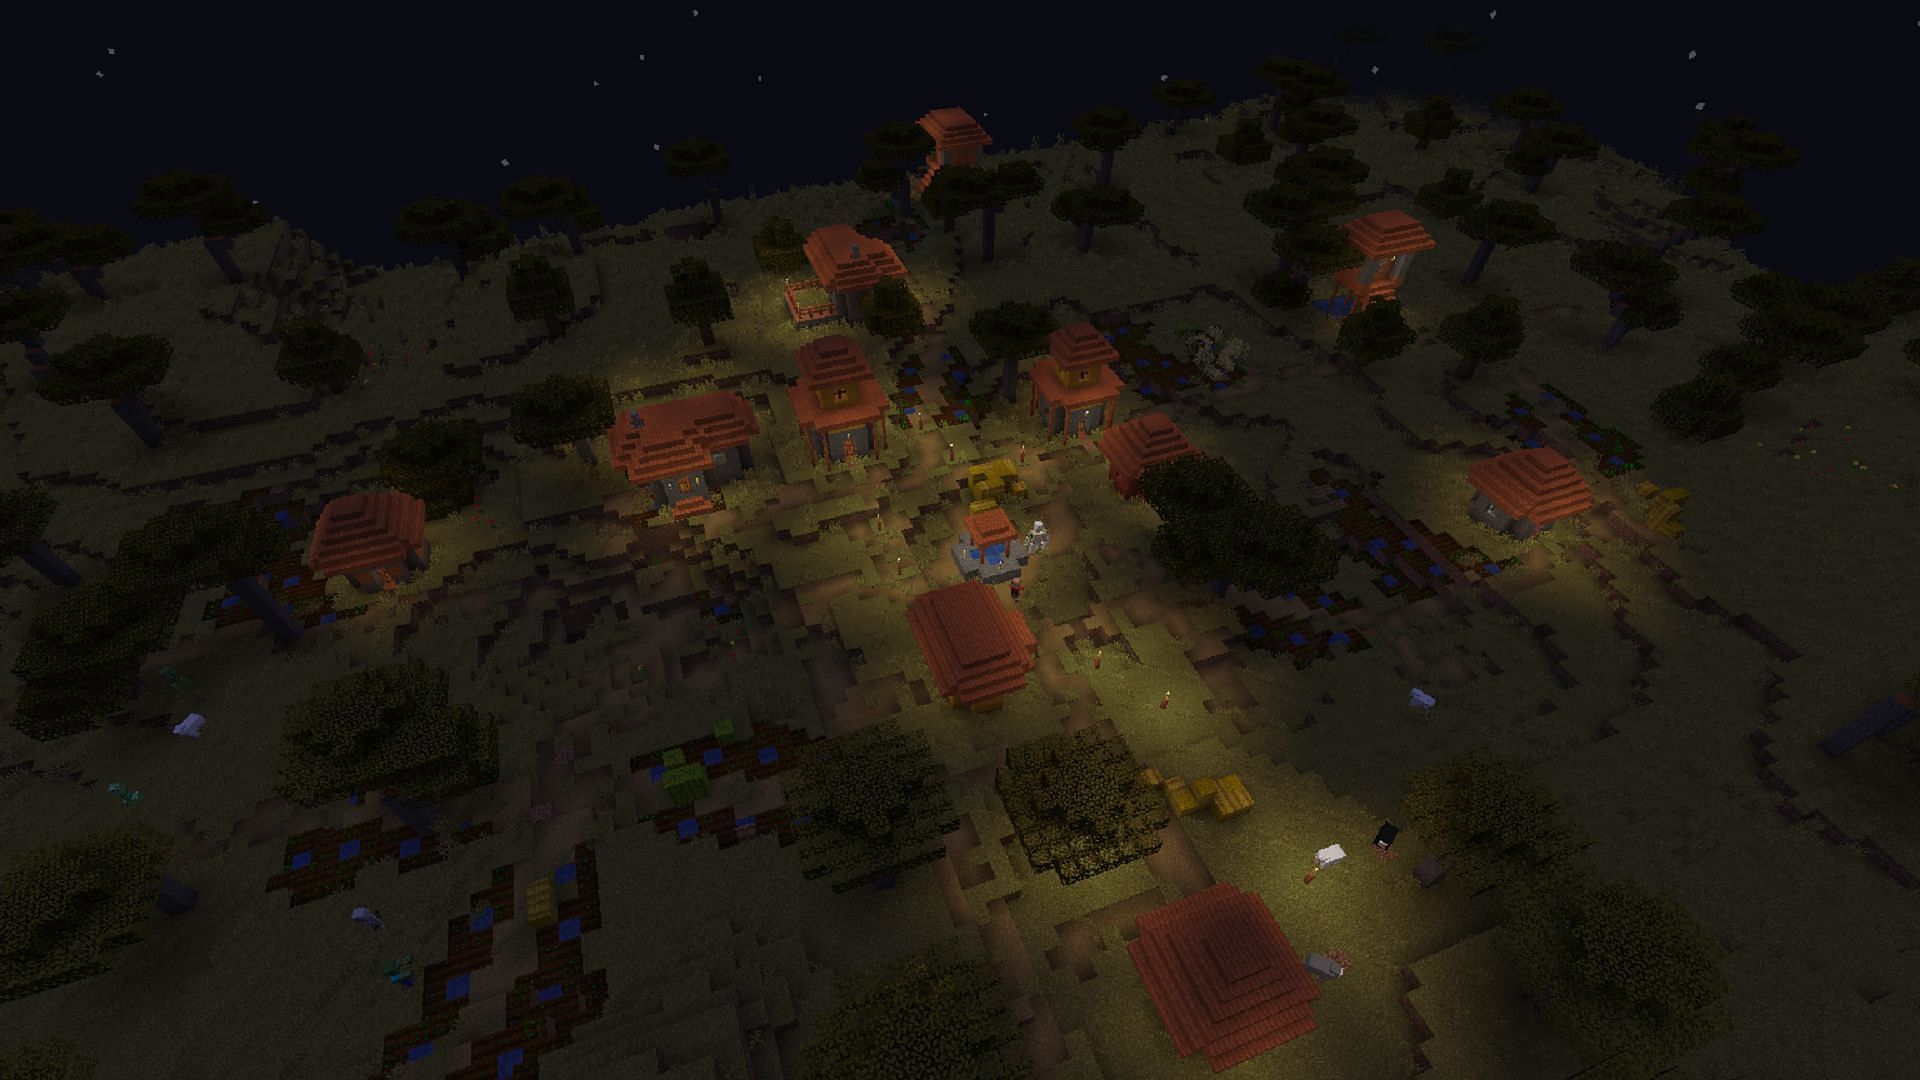 Savannah villages abound in this Minecraft seed (Image via Mojang)